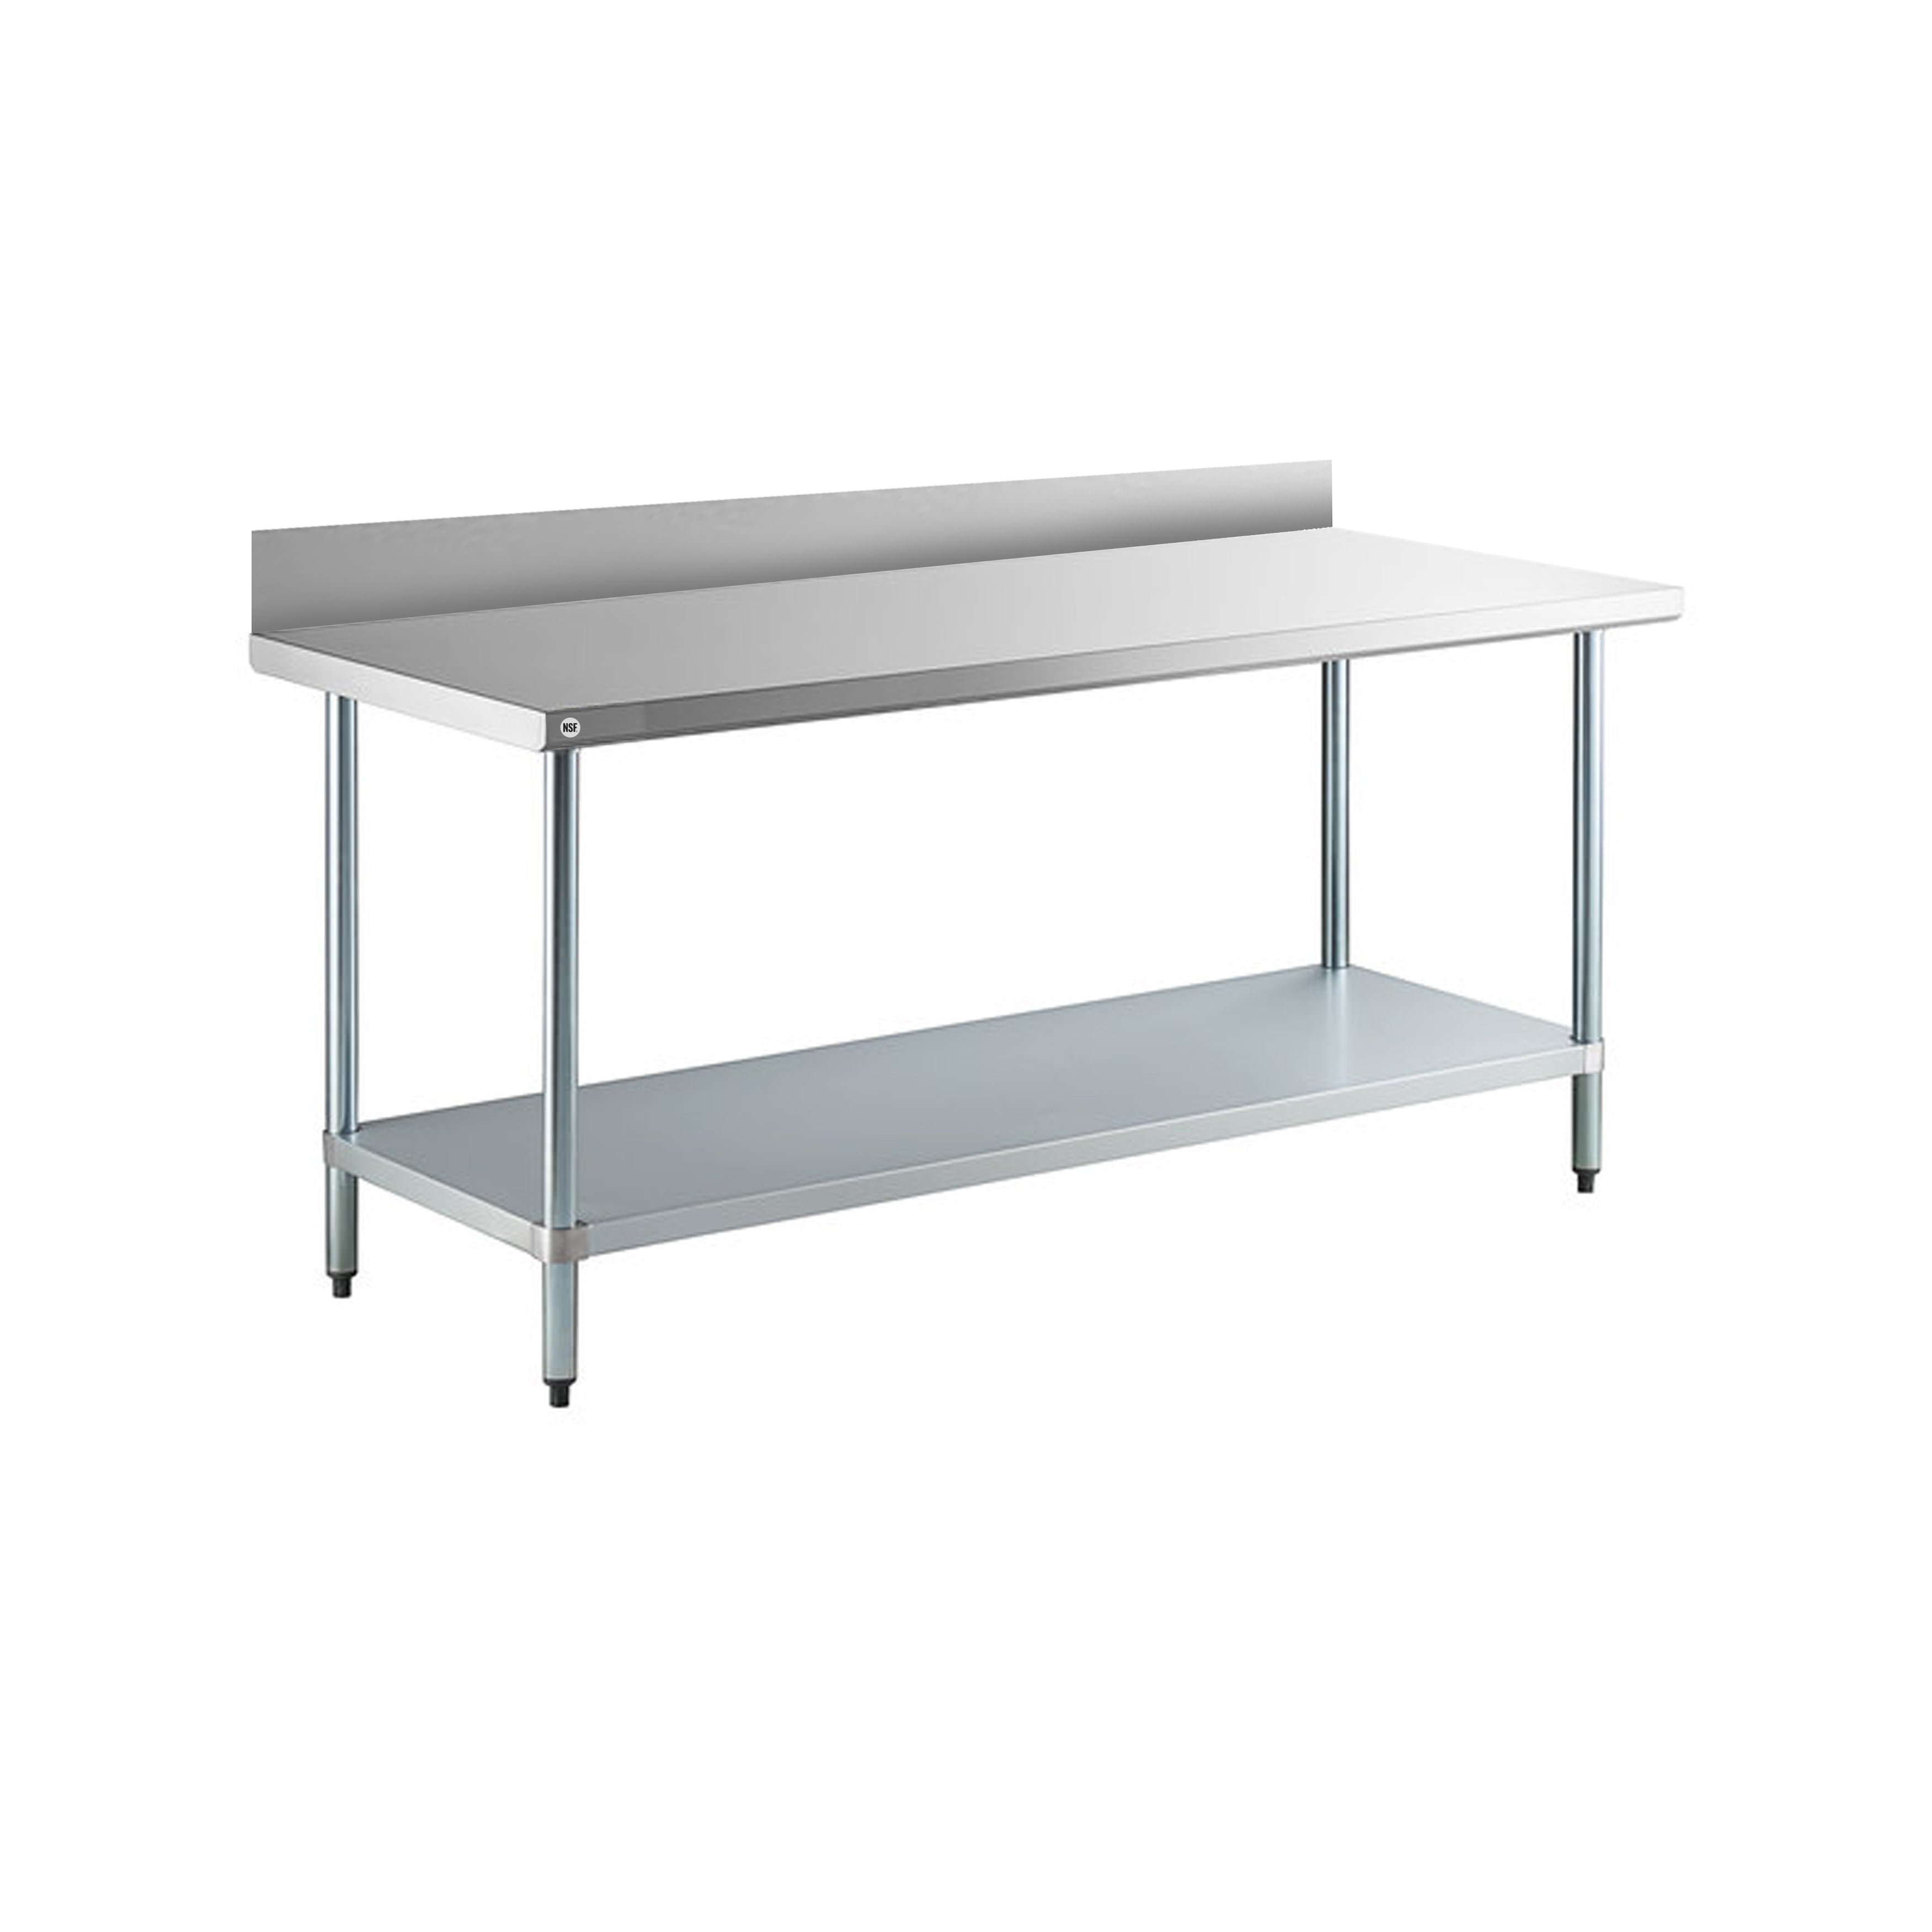 Omcan - 23796, Commercial 48" x 24" Stainless Steel Kitchen Work Table with 4" Back Splash 1000lbs Medium Duty